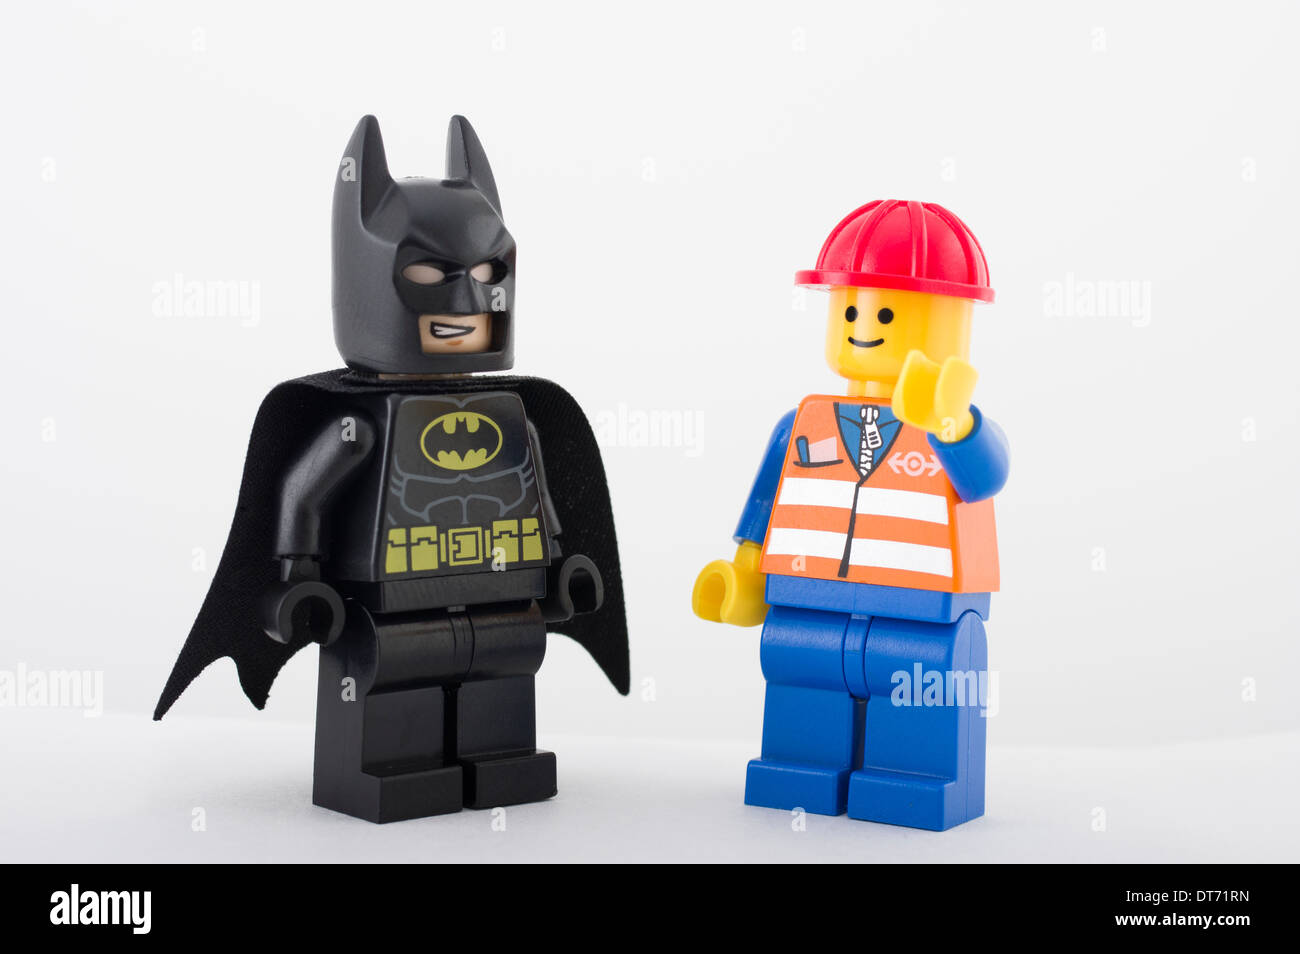 Lego Minifigure by Lego Group invented by Ole Kirk Christiansen made Billund Denmark Stock Photo